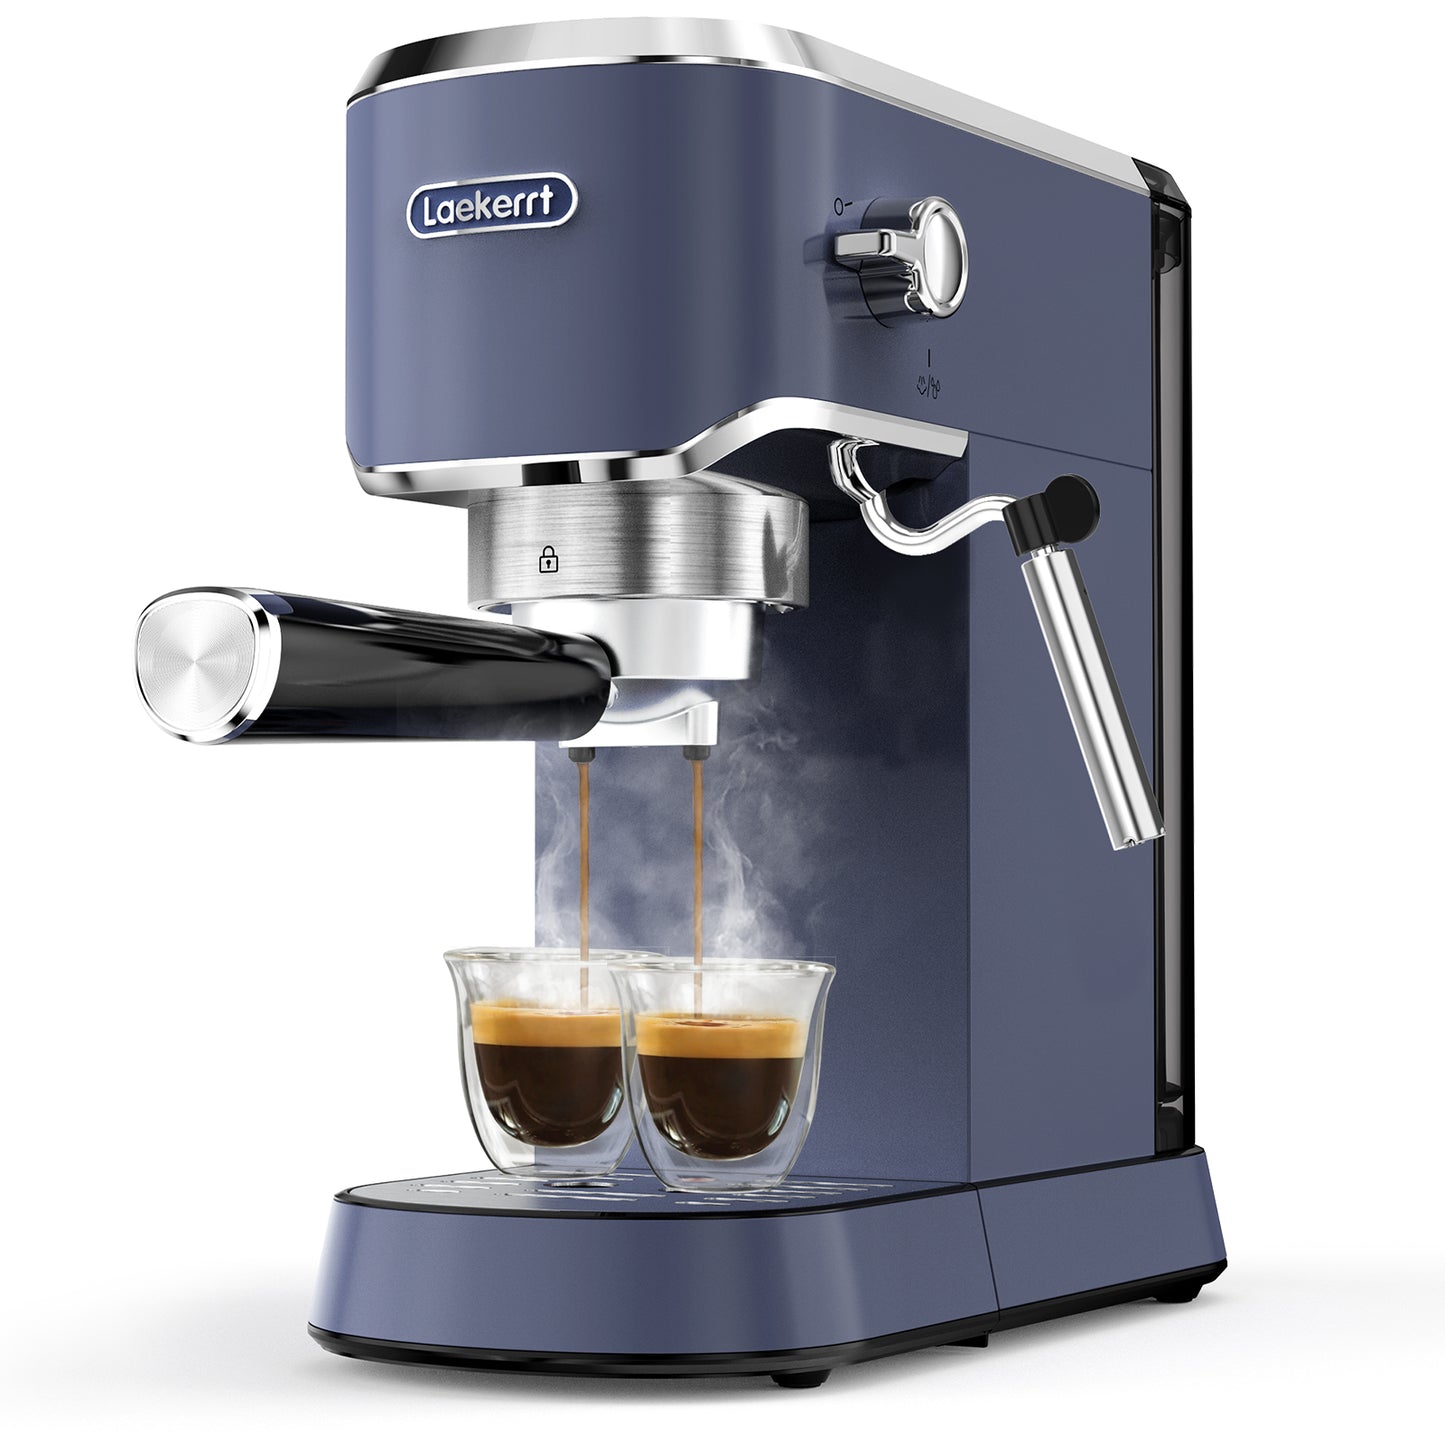 Used - Very Good] Laekerrt Espresso Machine with Milk Frother Steamer